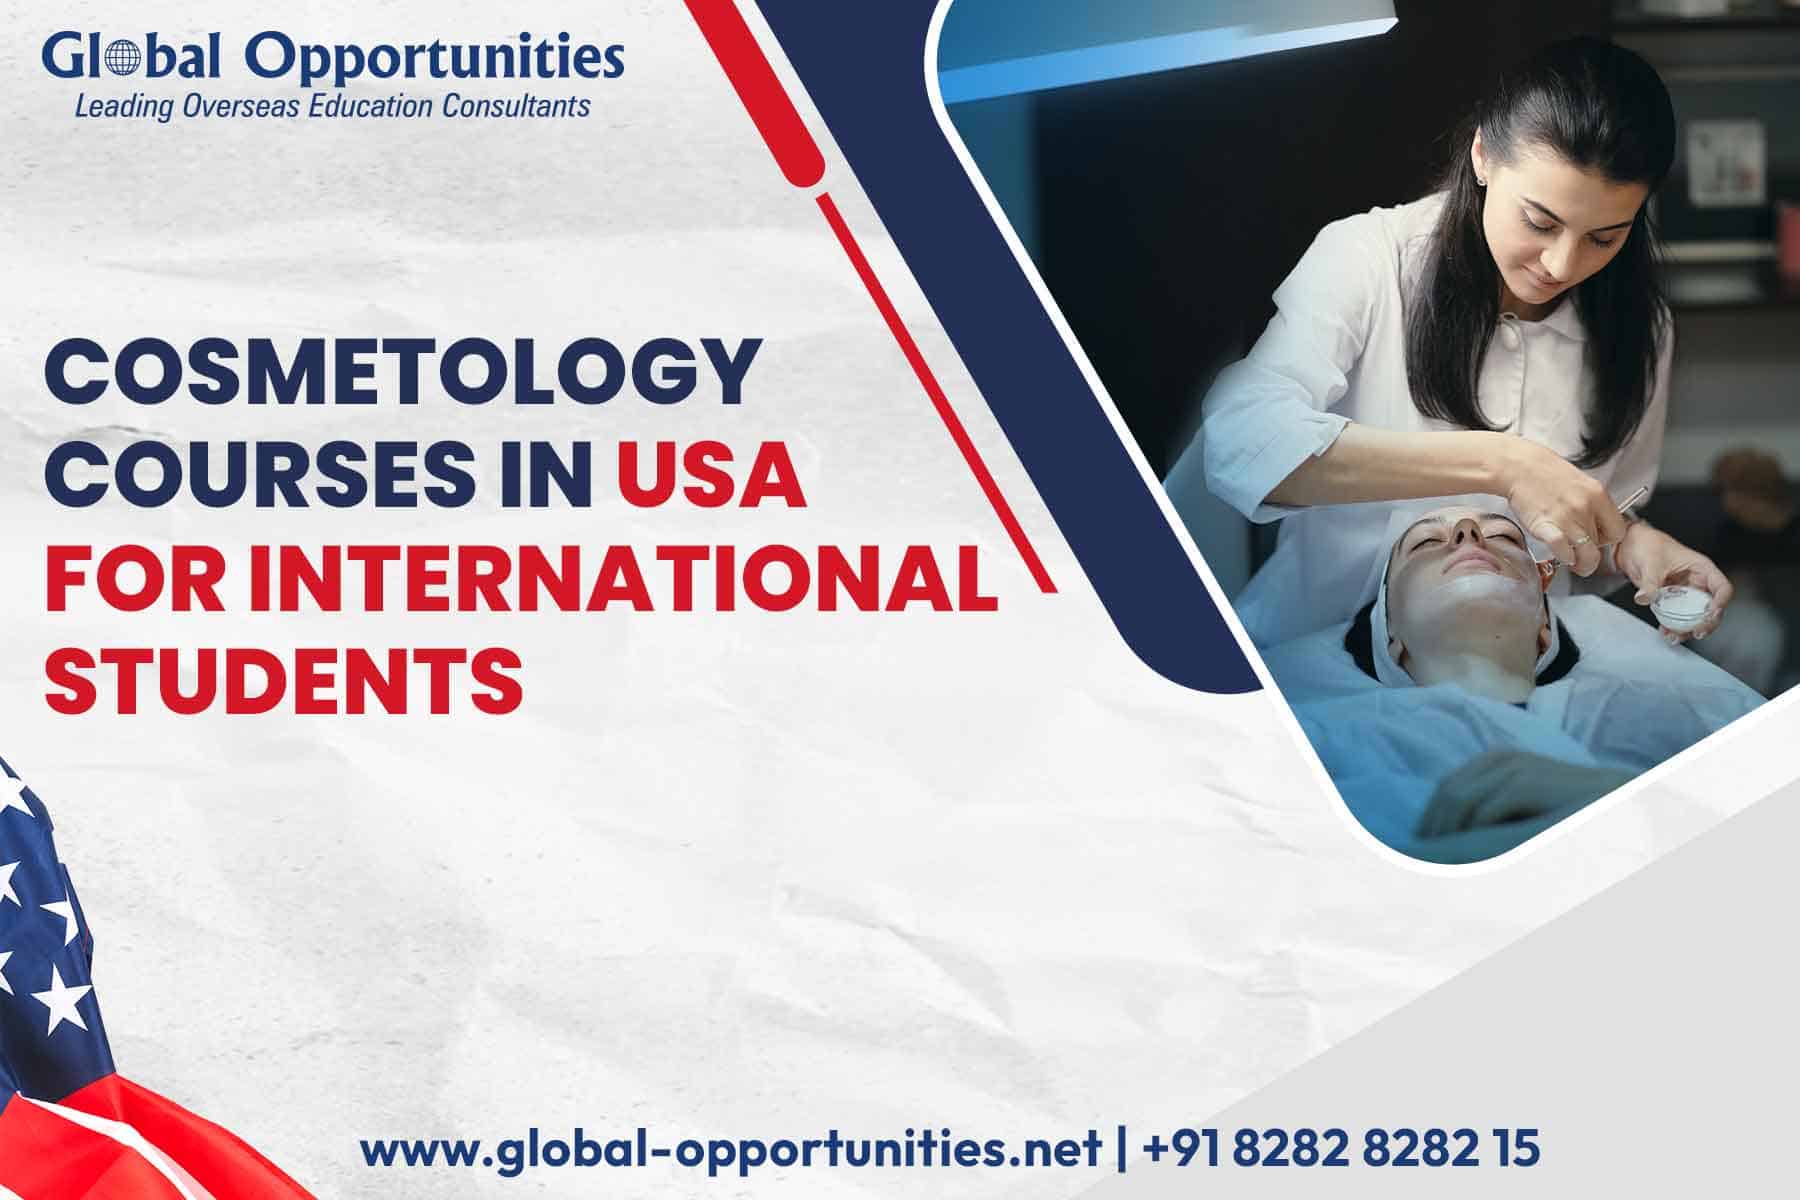 Cosmetology Courses in USA